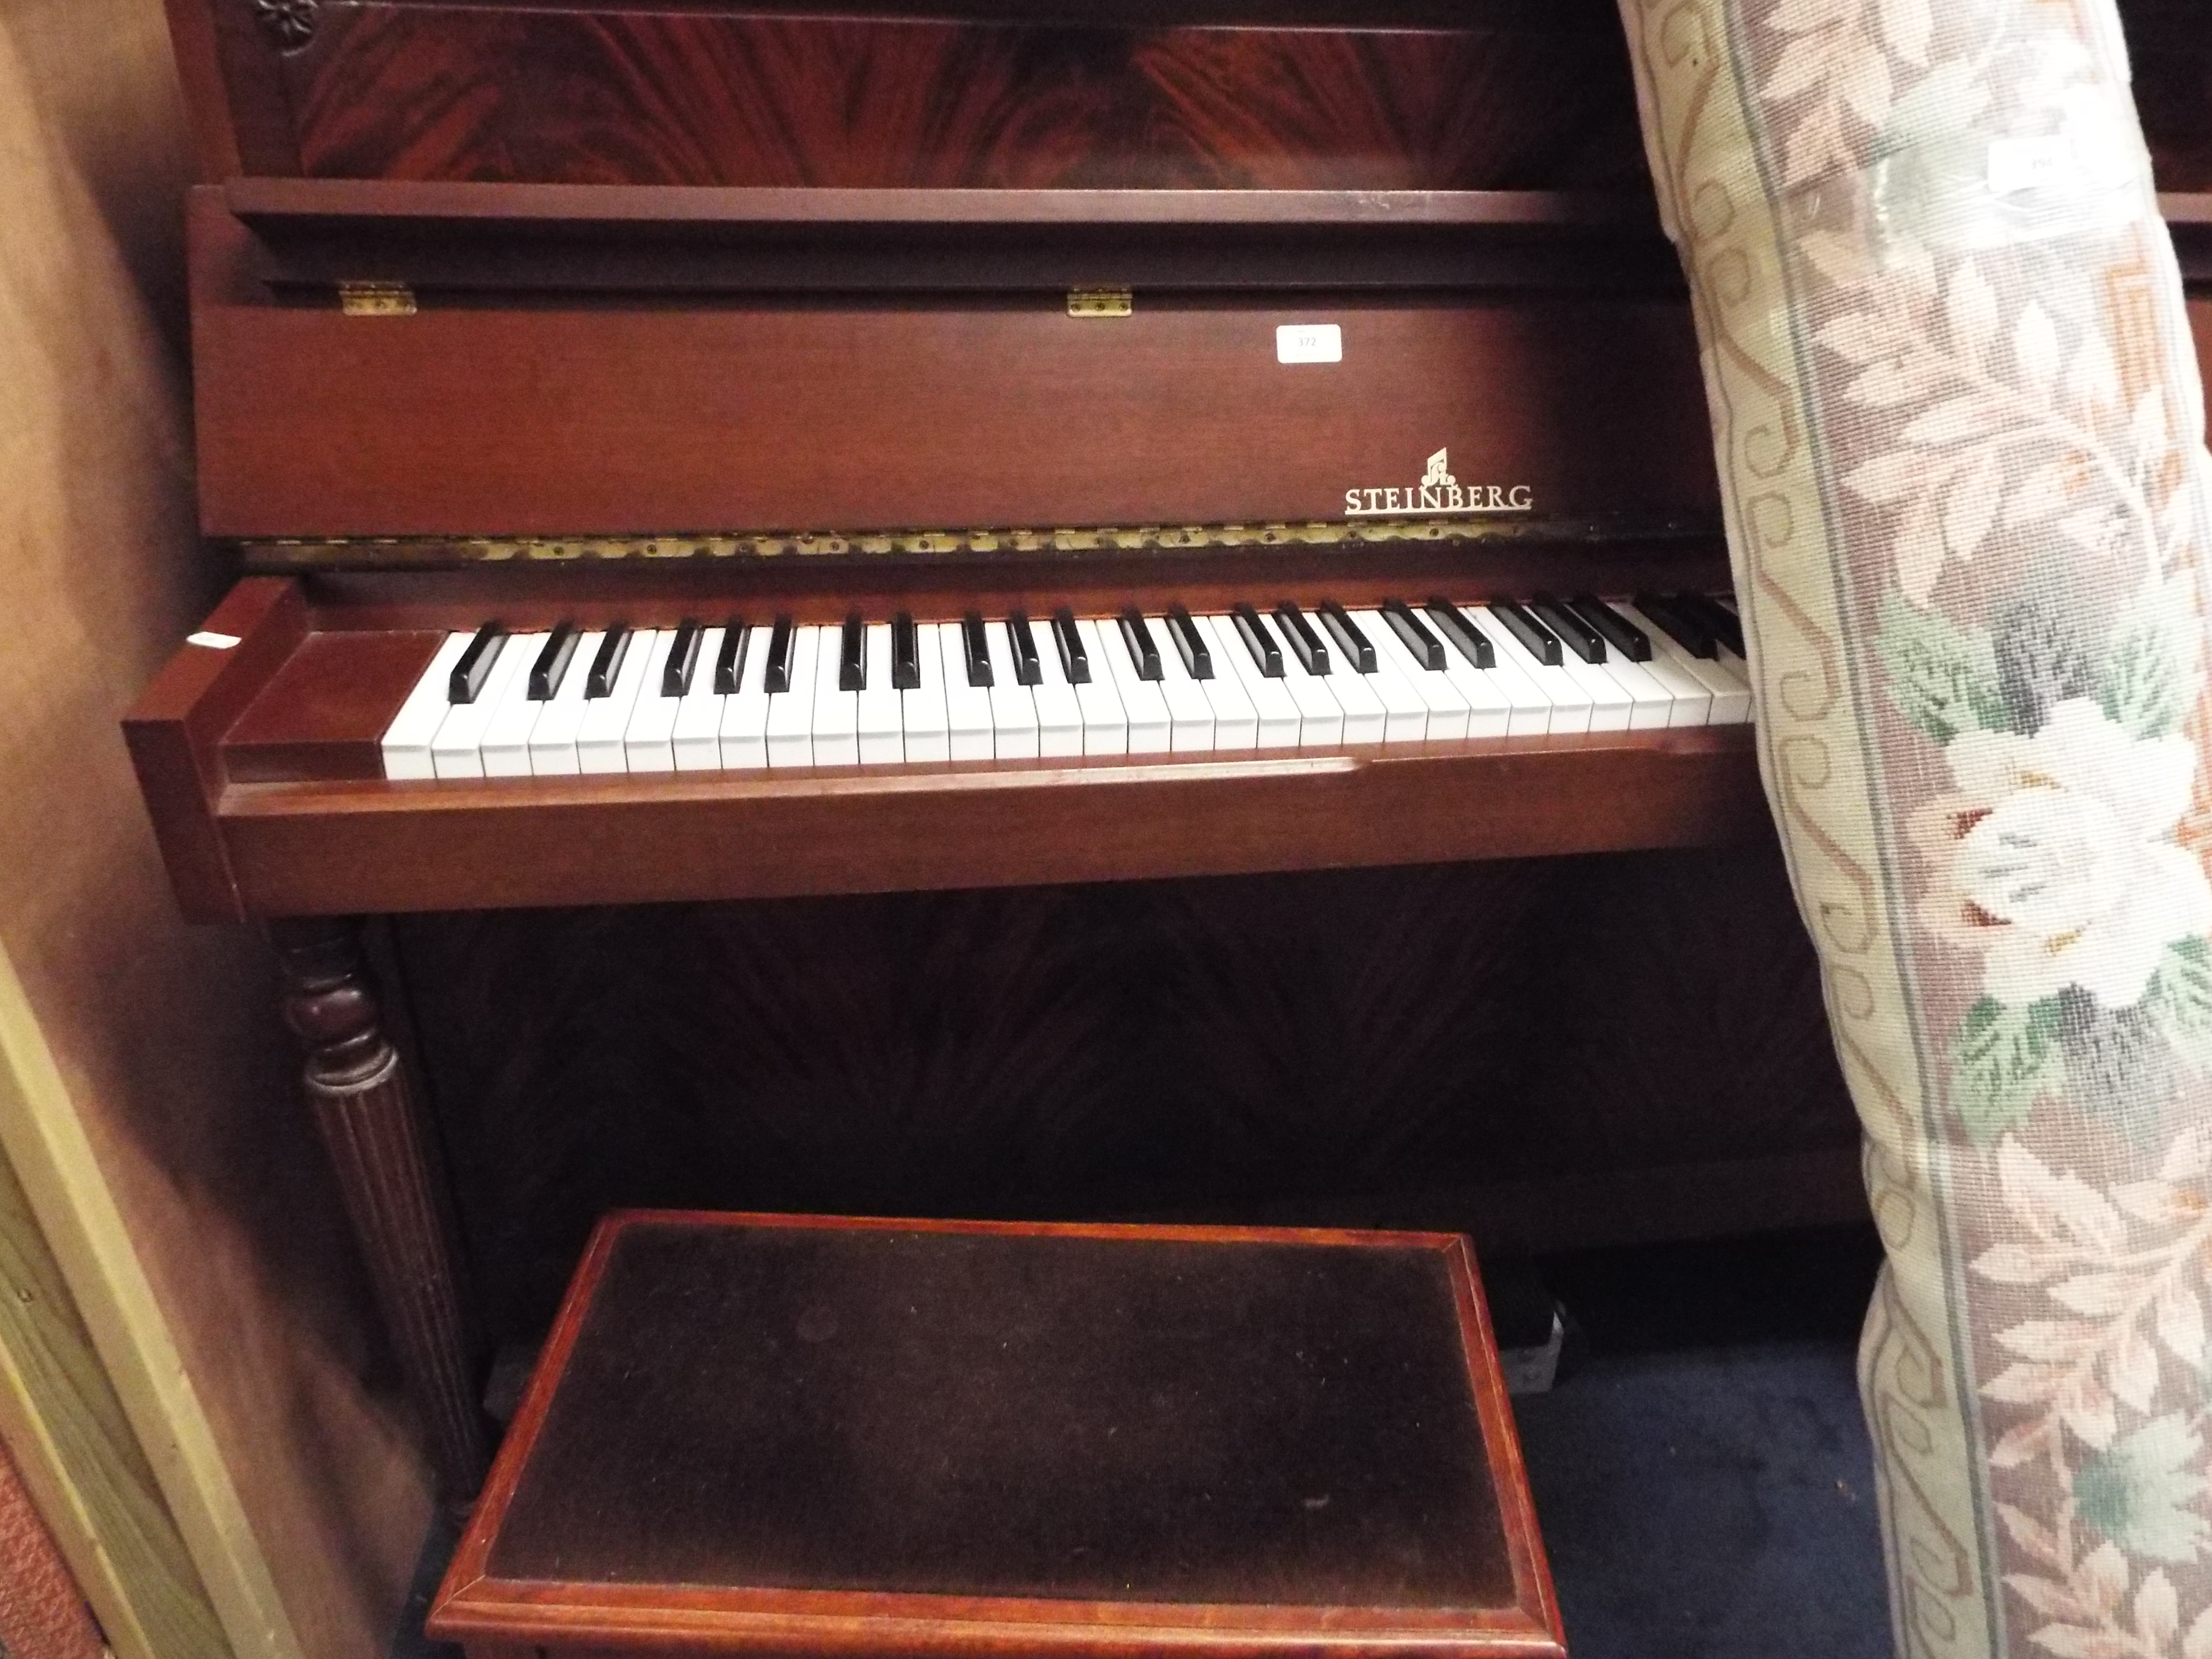 A Steinberg mahogany metal framed upright piano supplied by Harrods No.